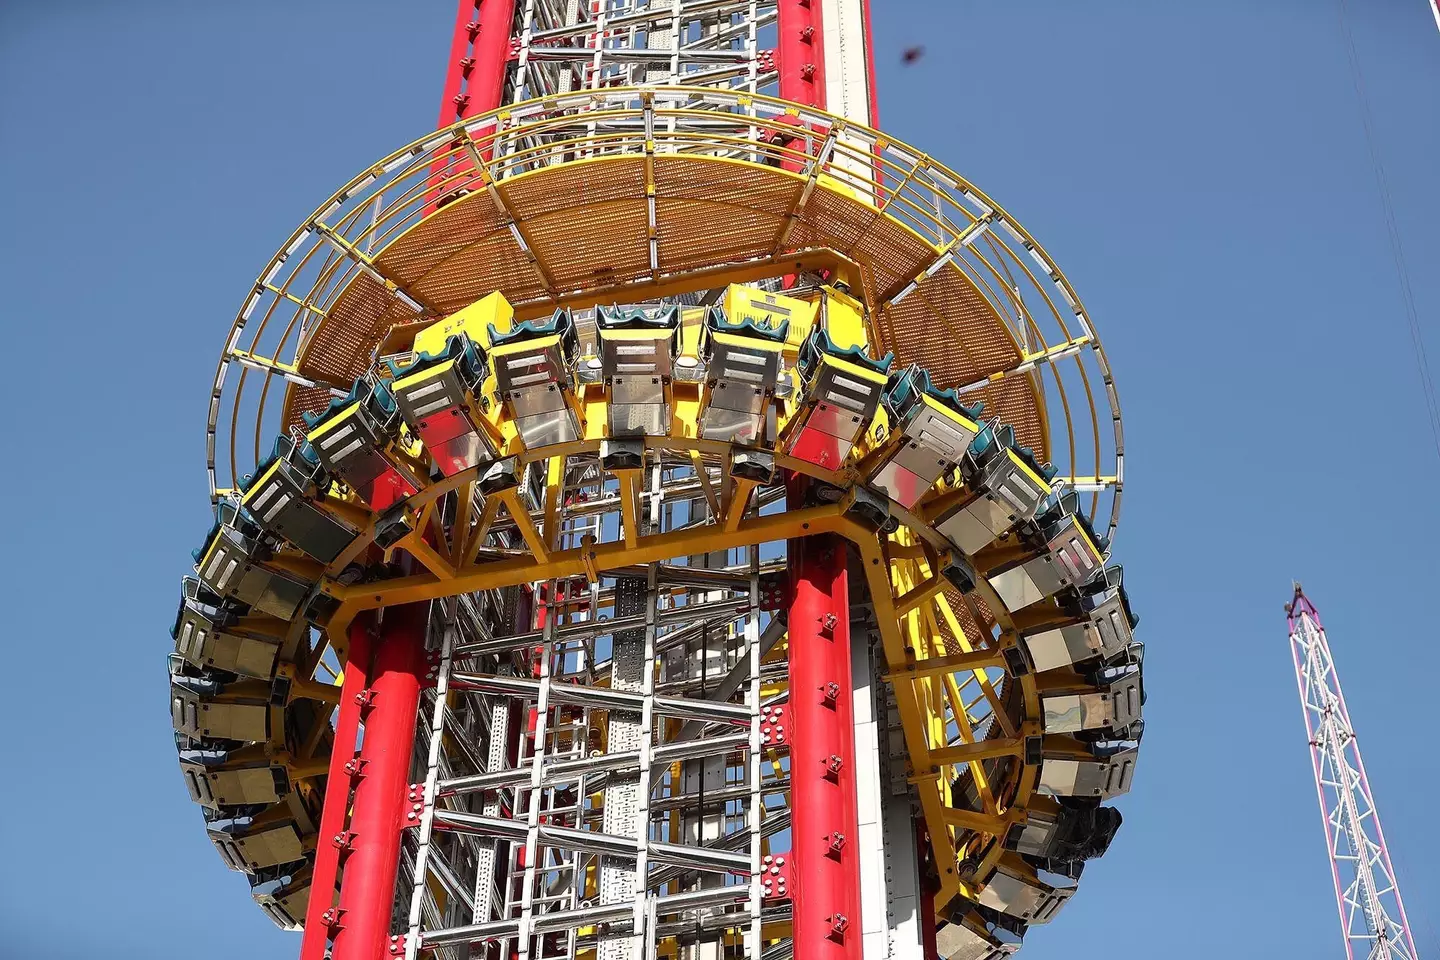 The FreeFall ride at ICON Park, where Tyre Sampson lost his life.